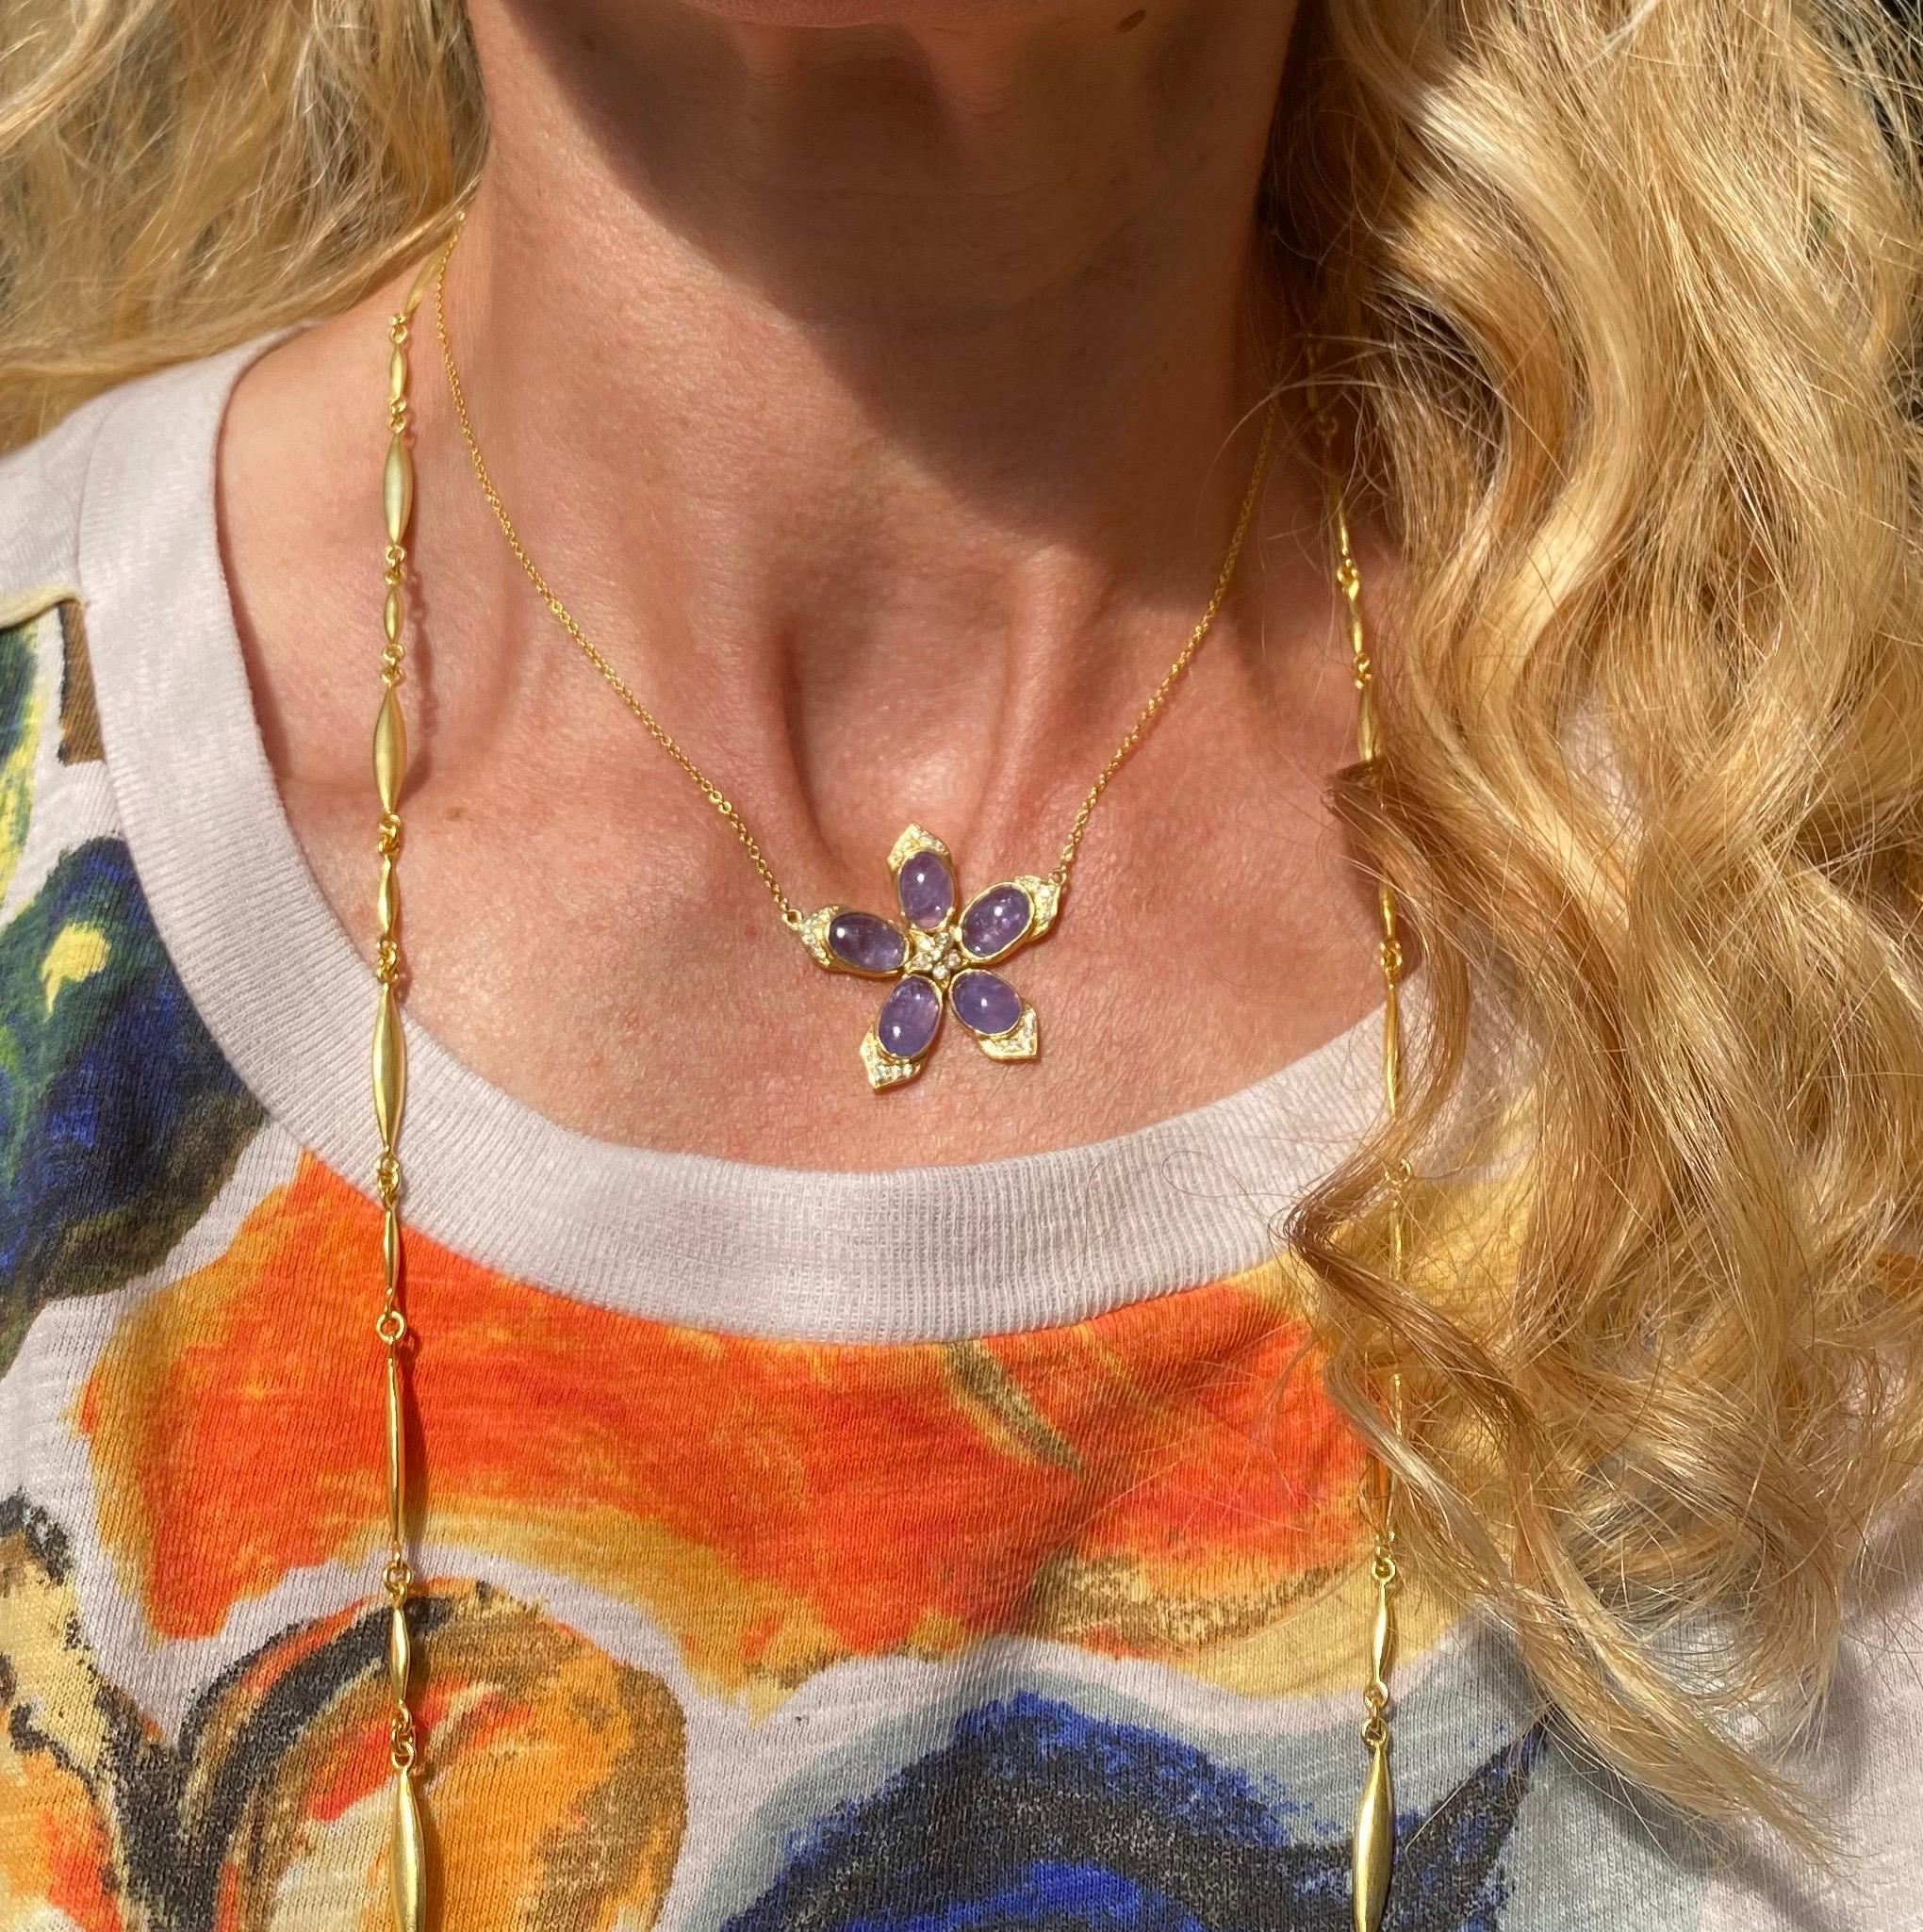 Cabochon 7.05cts Tanzanite, Diamond and Gold Flower Necklace by Lauren Harper For Sale